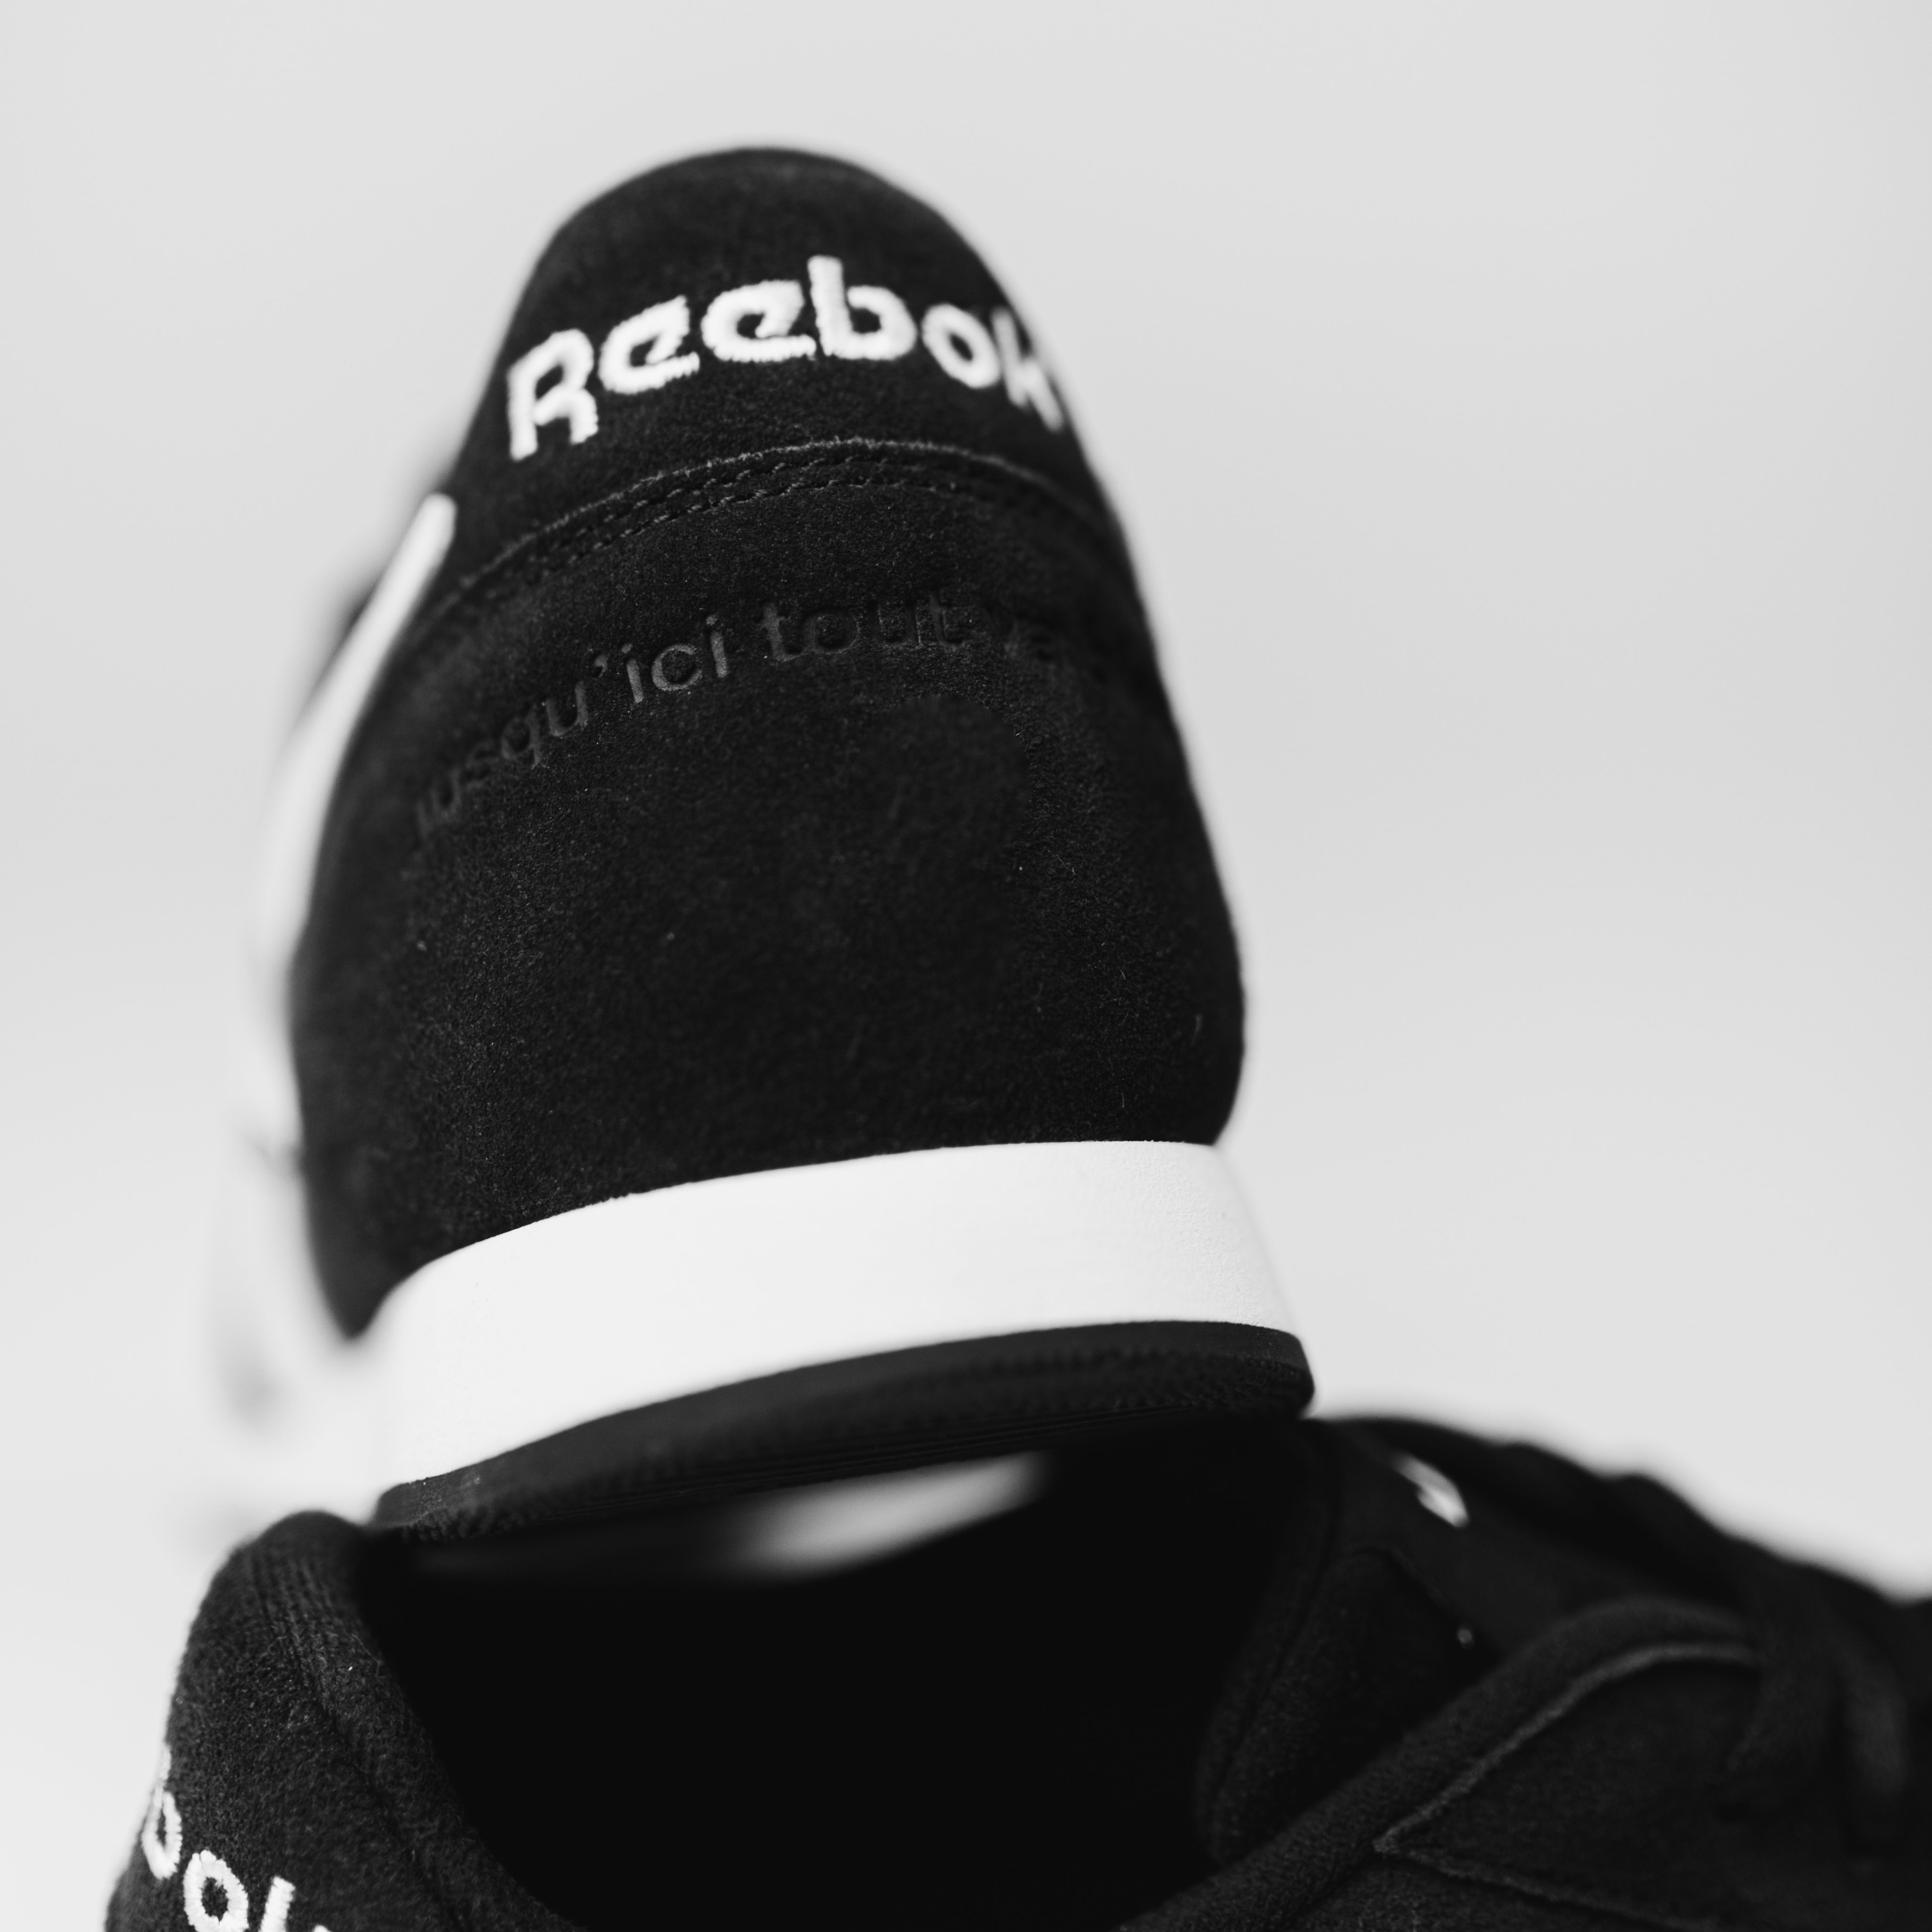 La Haine' x Reebok: an From the Streets of Paris | Complex